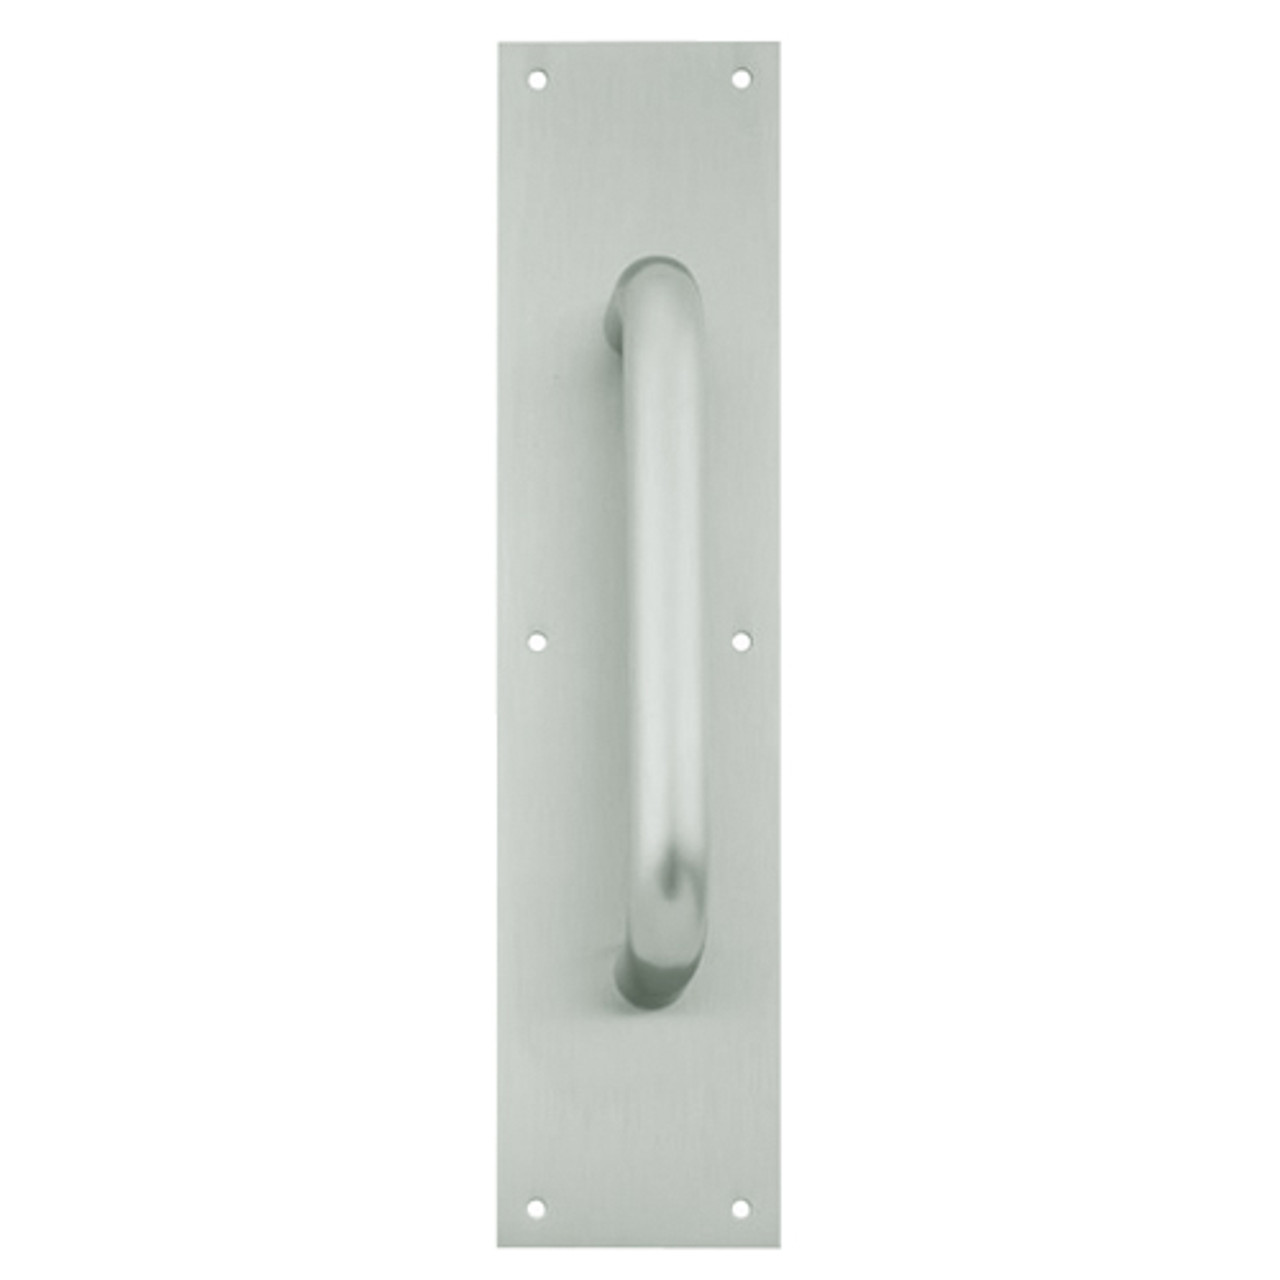 8303-8-US15-6x16 IVES Architectural Door Trim 6x16 Inch Pull Plate in Satin Nickel